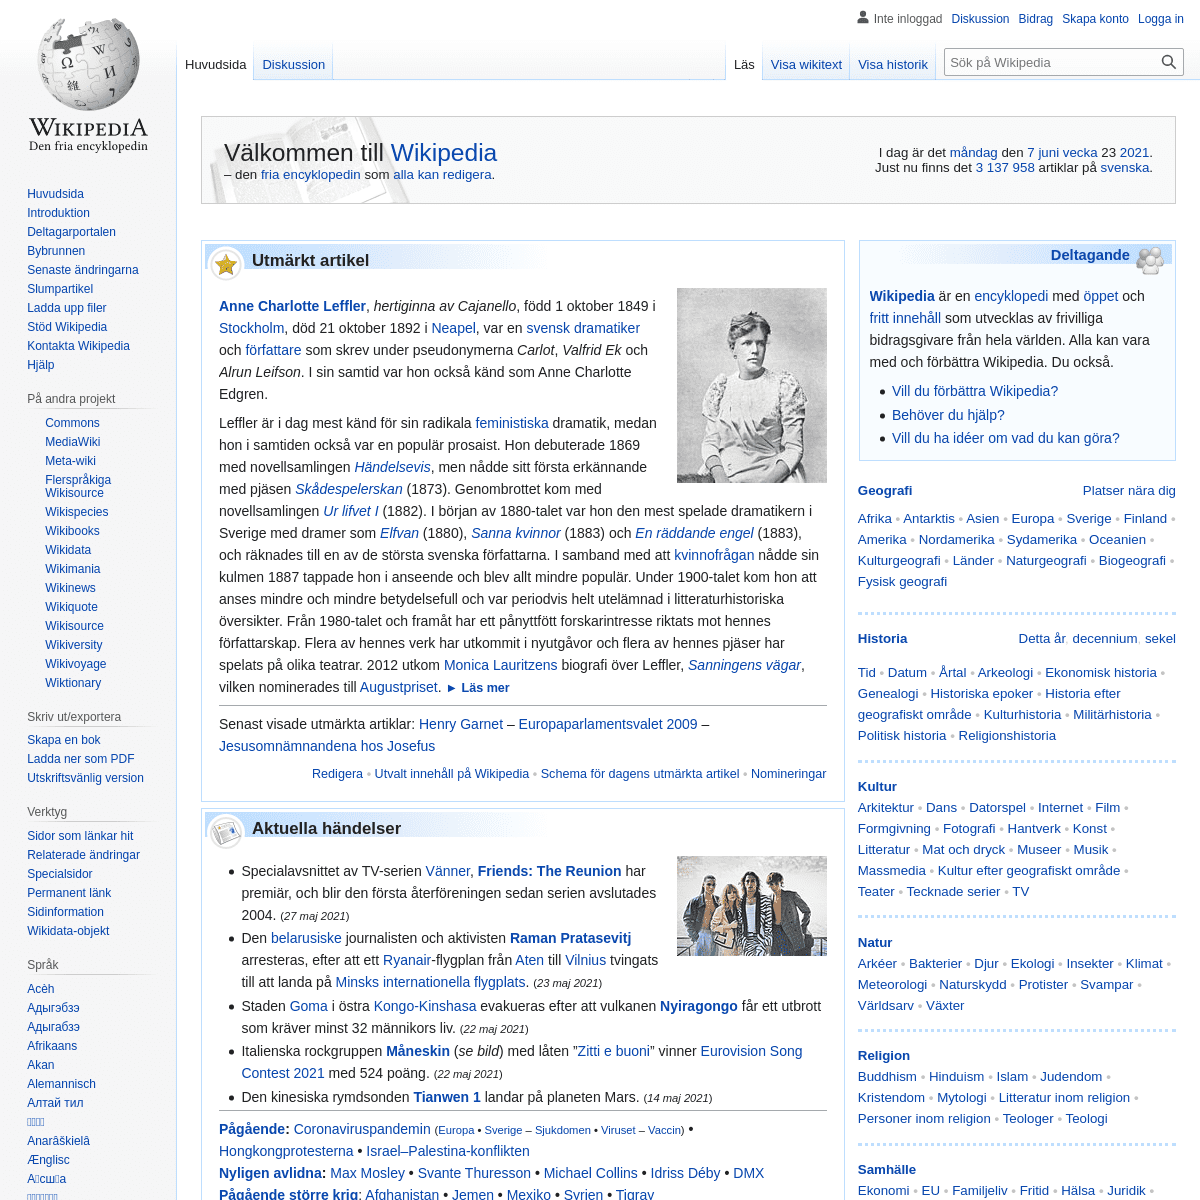 A complete backup of https://sv.wikipedia.org